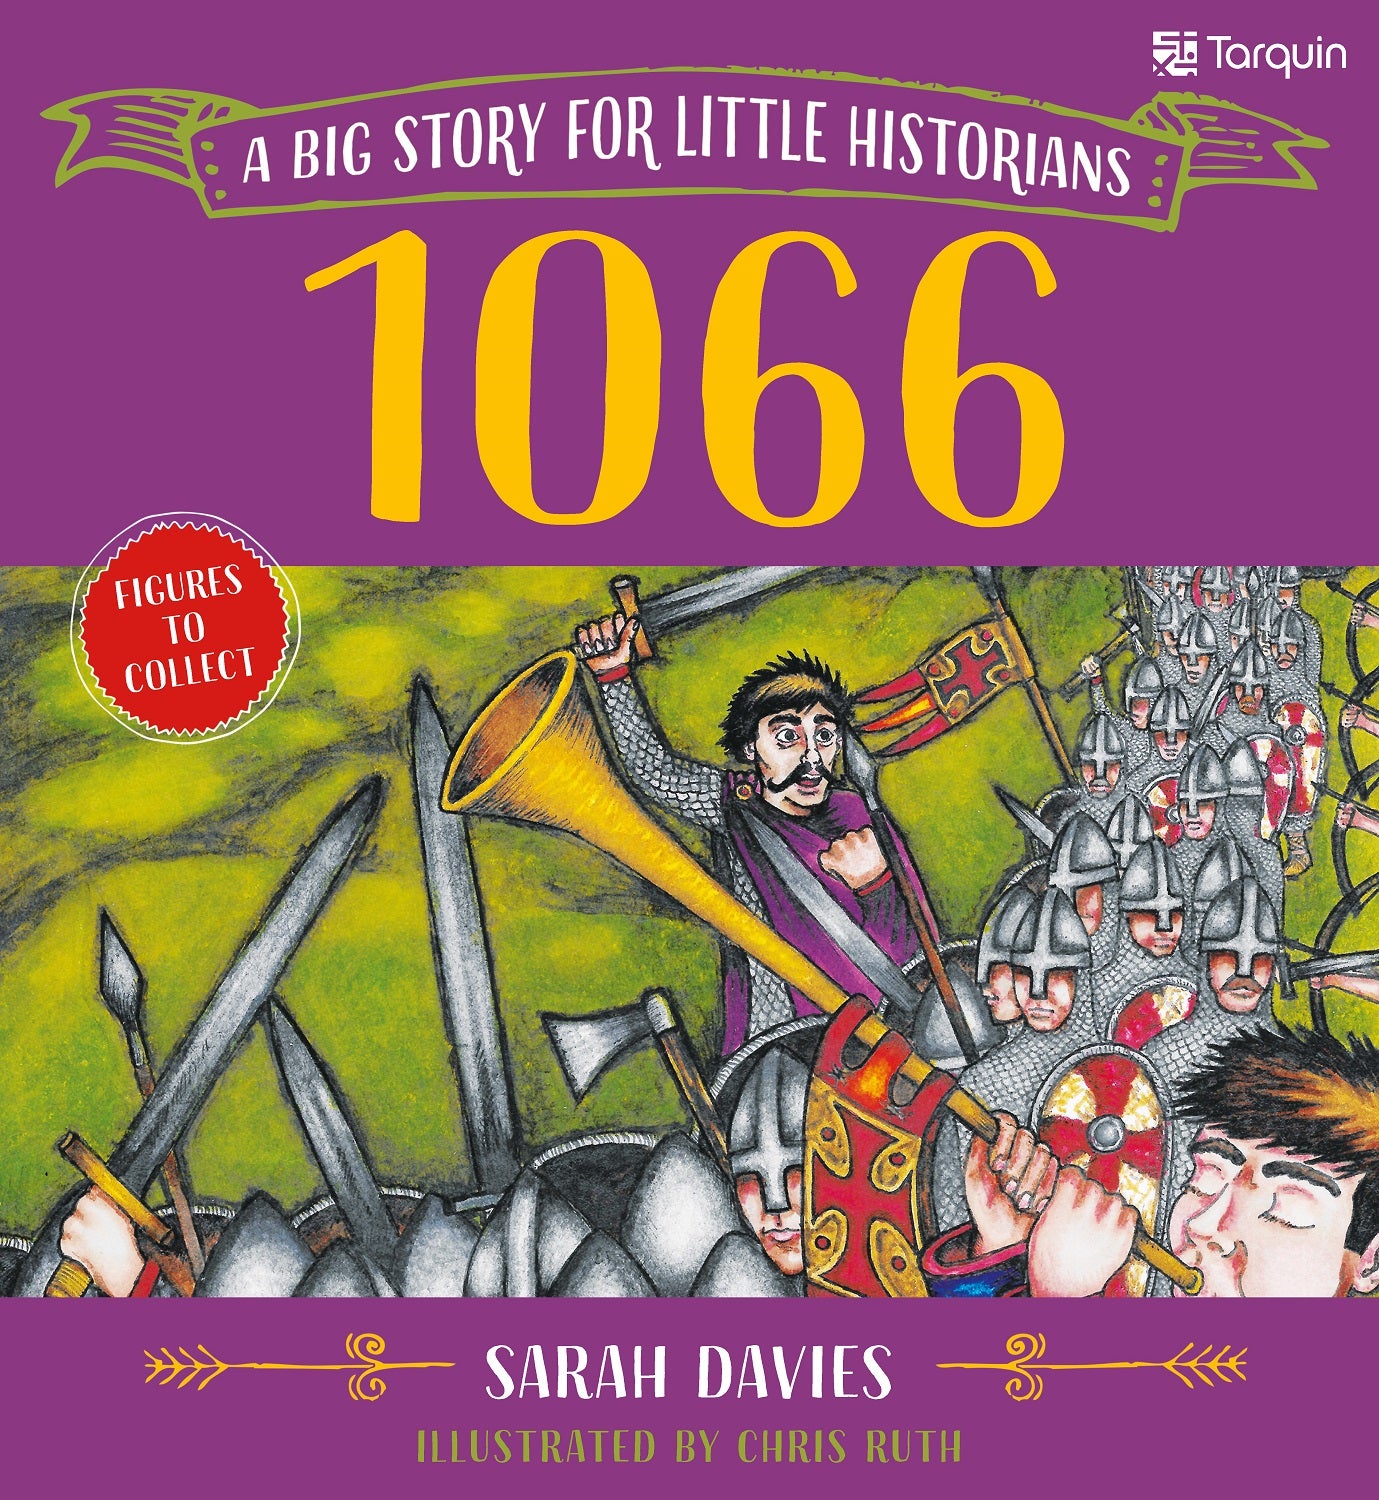 1066 - A Big Story for Little Historians